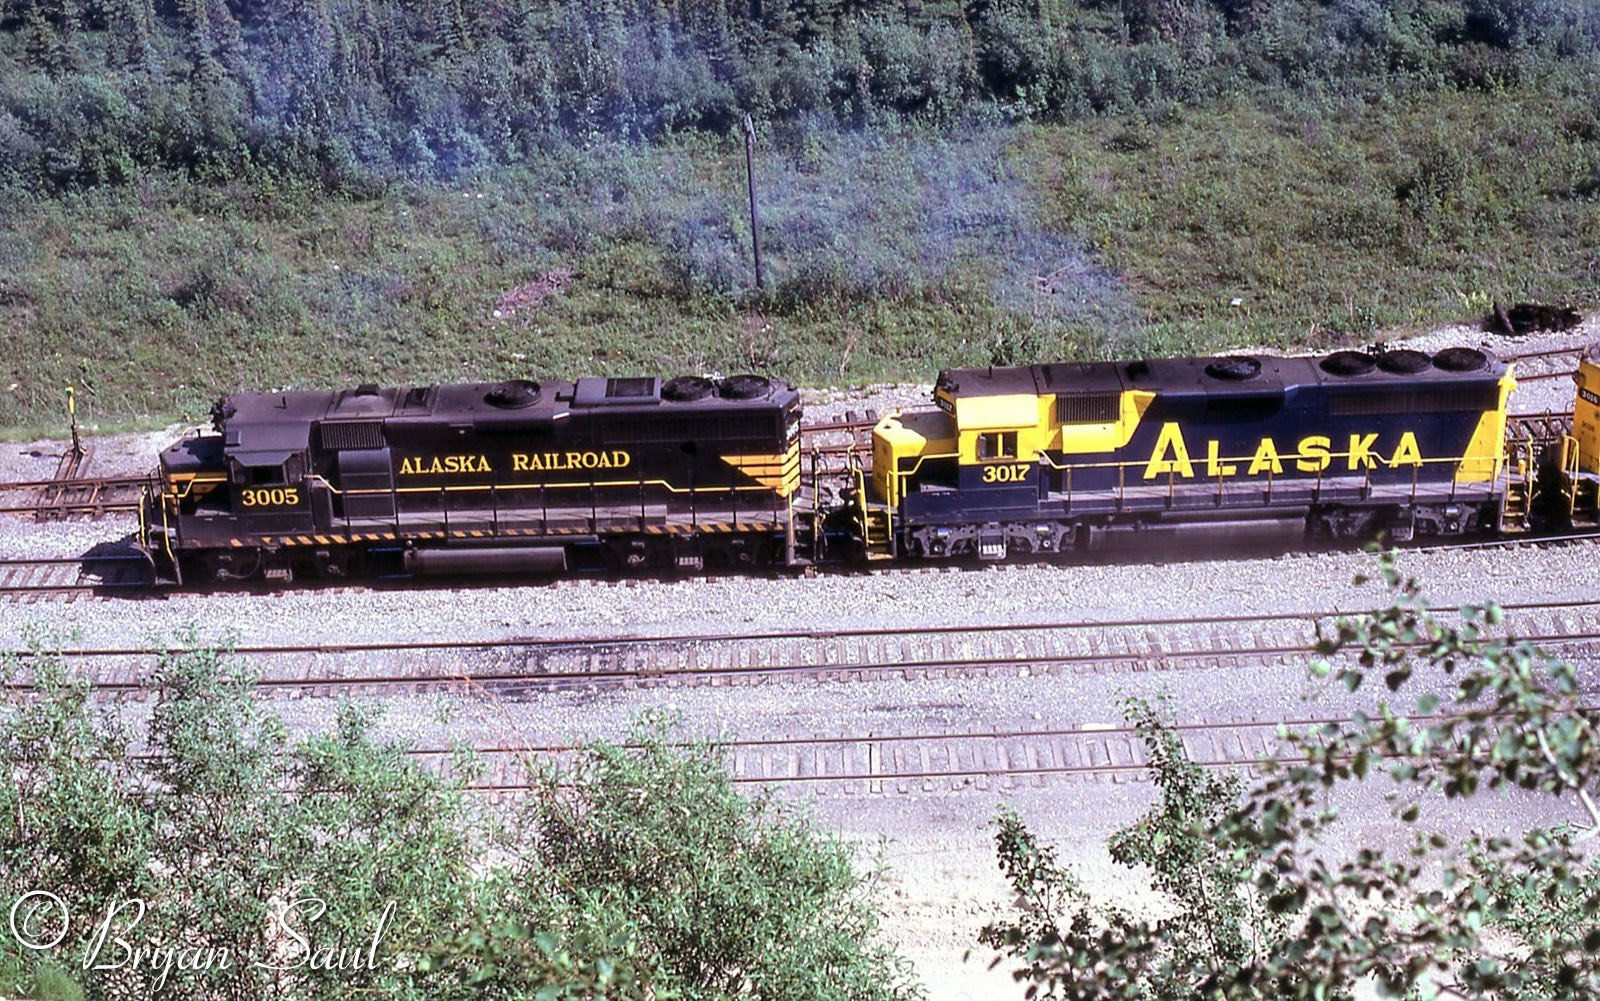 The 3017, another ex-Conrail unit, trailing GP 40-2 3005 at Healy in July of 1985.The 3017, another ex-Conrail unit, trailing GP 40-2 3005 at Healy in July of 1985.